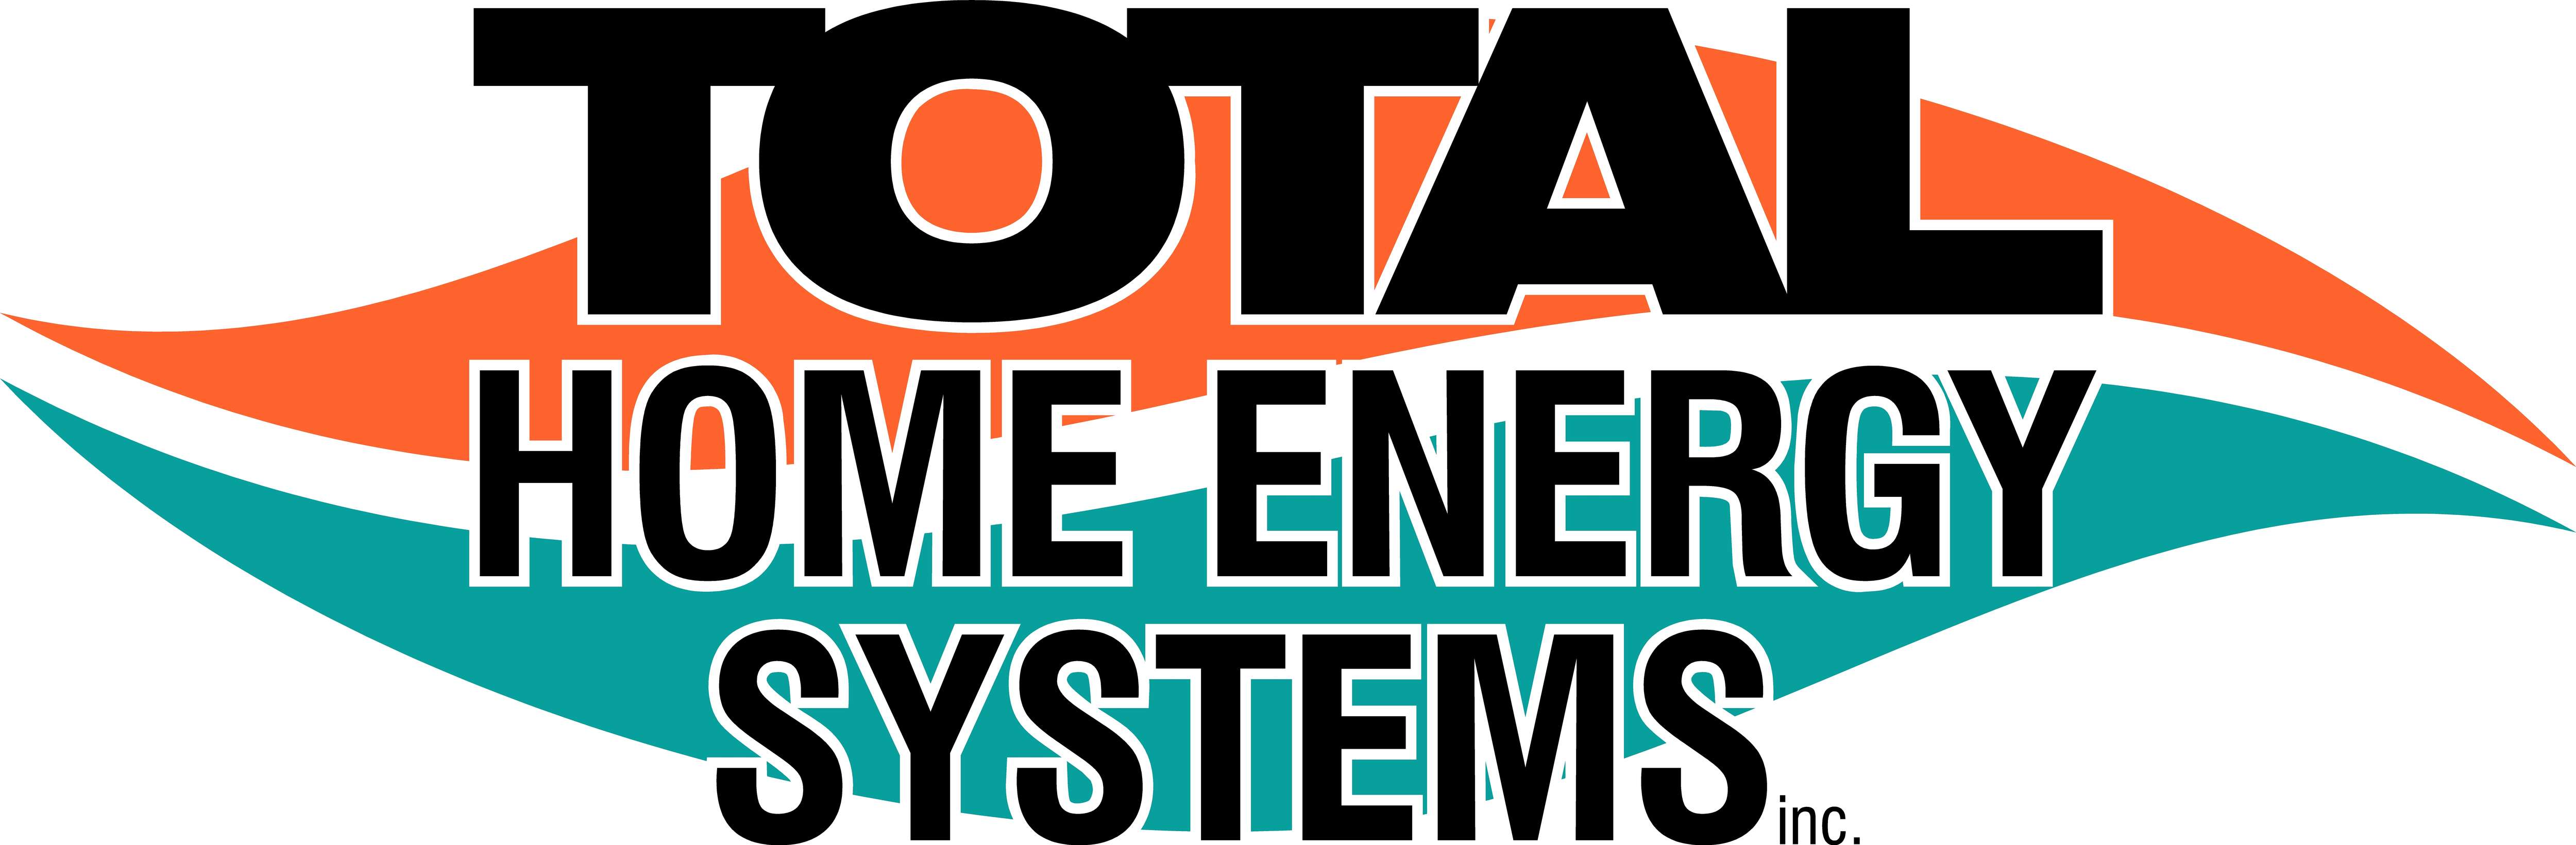 Total Home Energy Systems